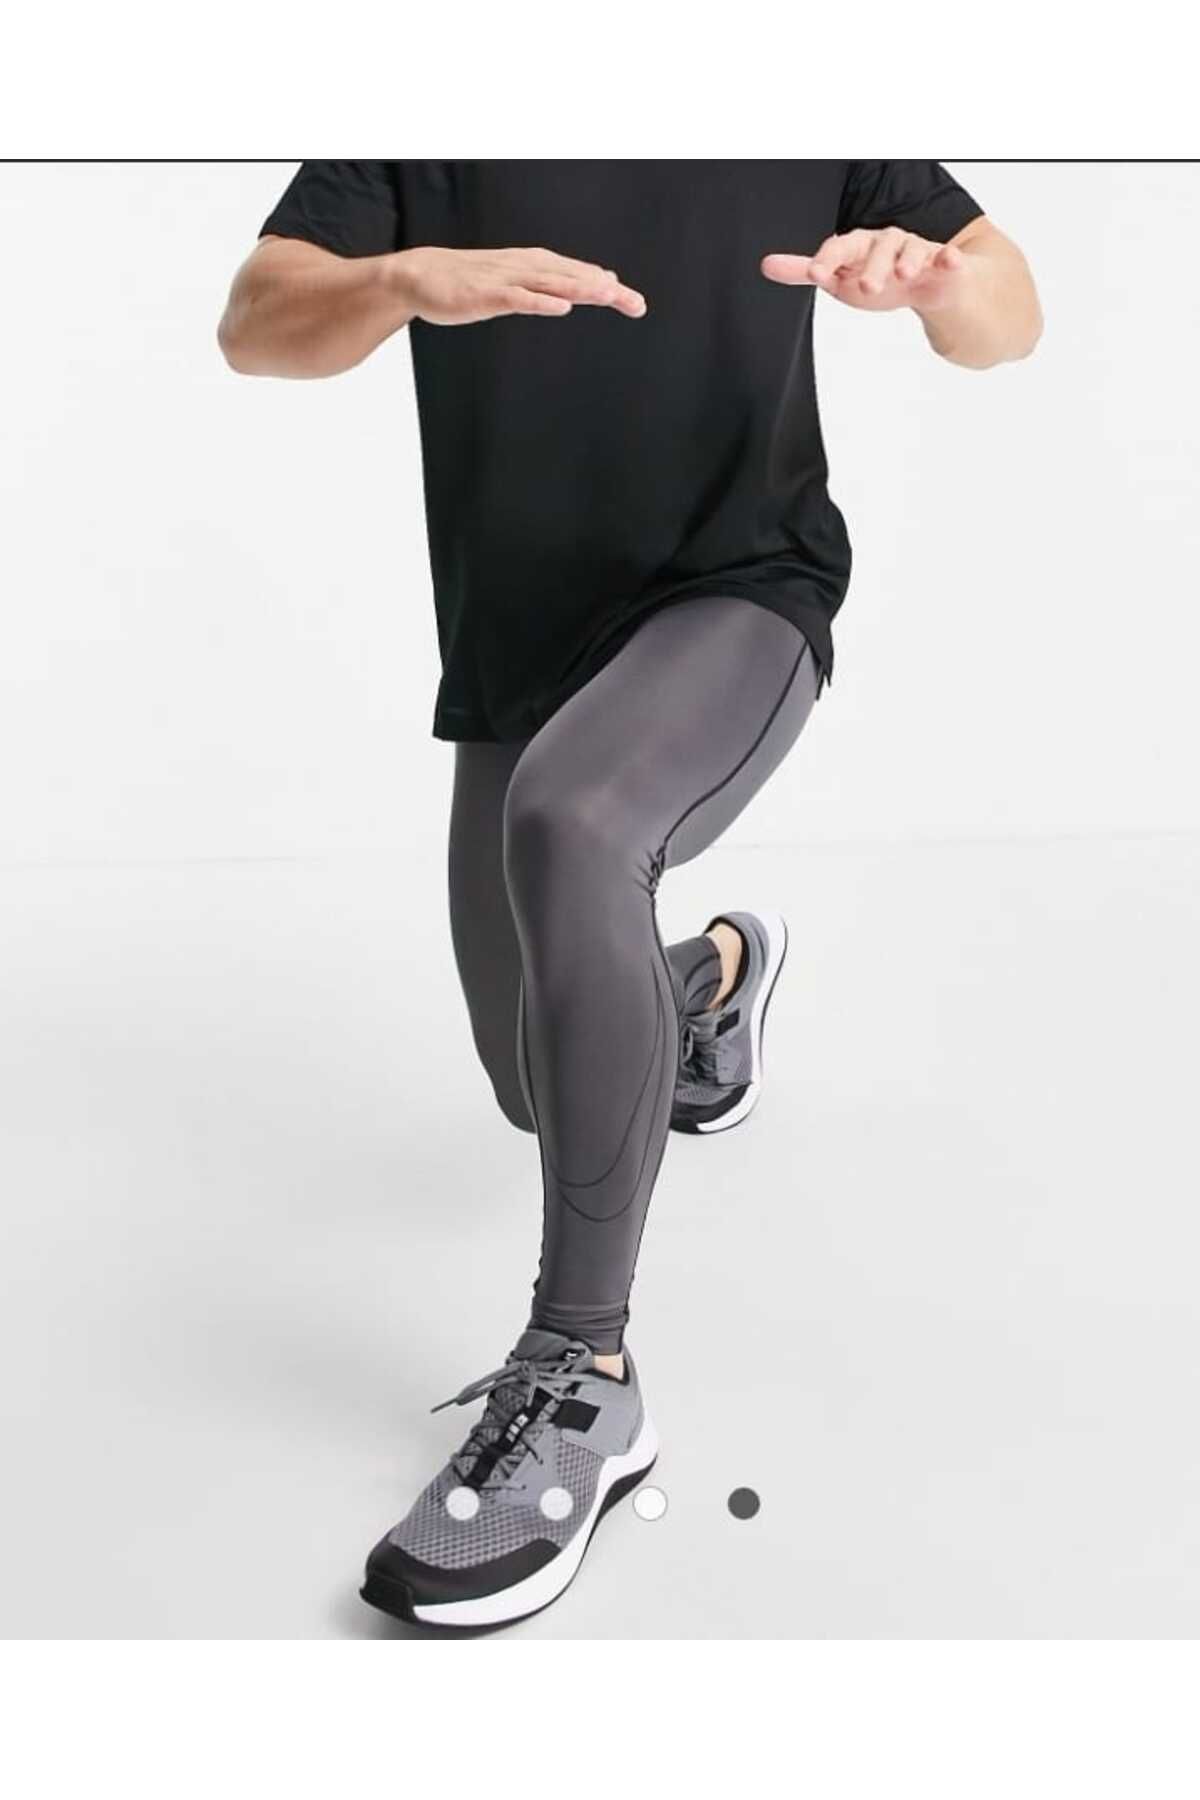 Nike Pro Training Tights Leggings 100 BV5641-100, Sports accessories, Official archives of Merkandi